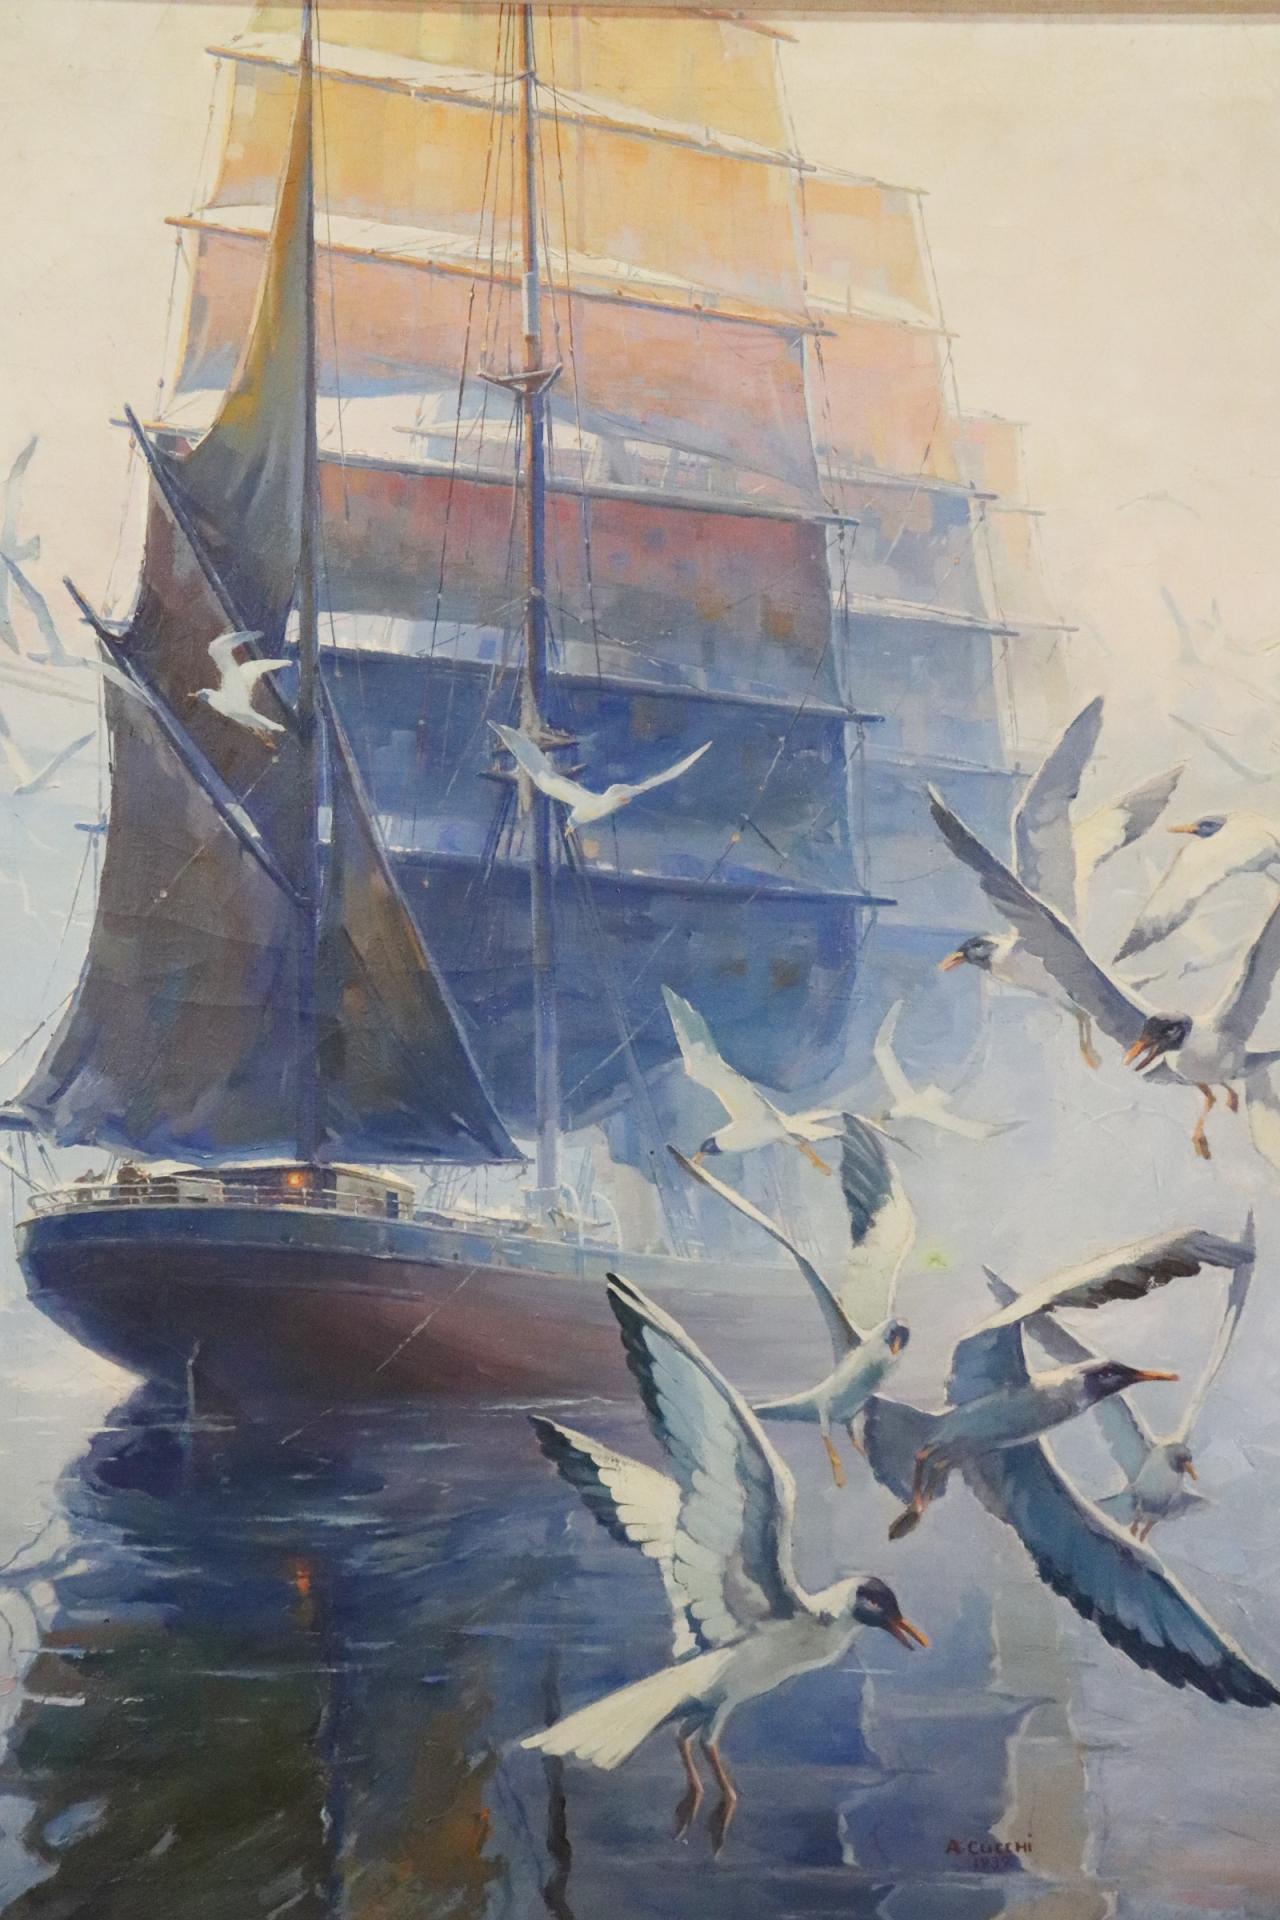 American Classical Gorgeous Oil Painting Sailing Ship Early Morning Fog signed A. Cucchi Dates 1939 For Sale